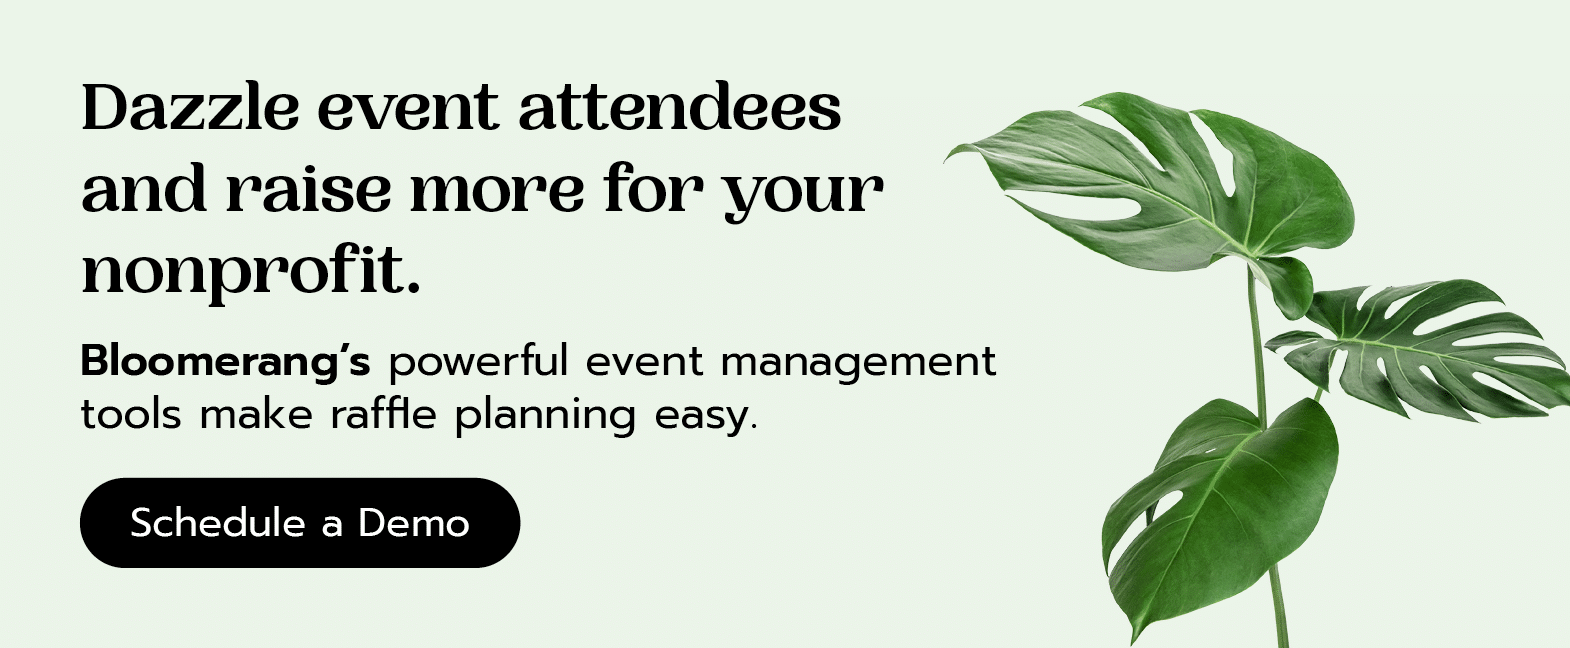 Dazzle event attendees and raise more for your nonprofit. Bloomerang’s powerful event management tools make raffle planning easy. Schedule a demo.